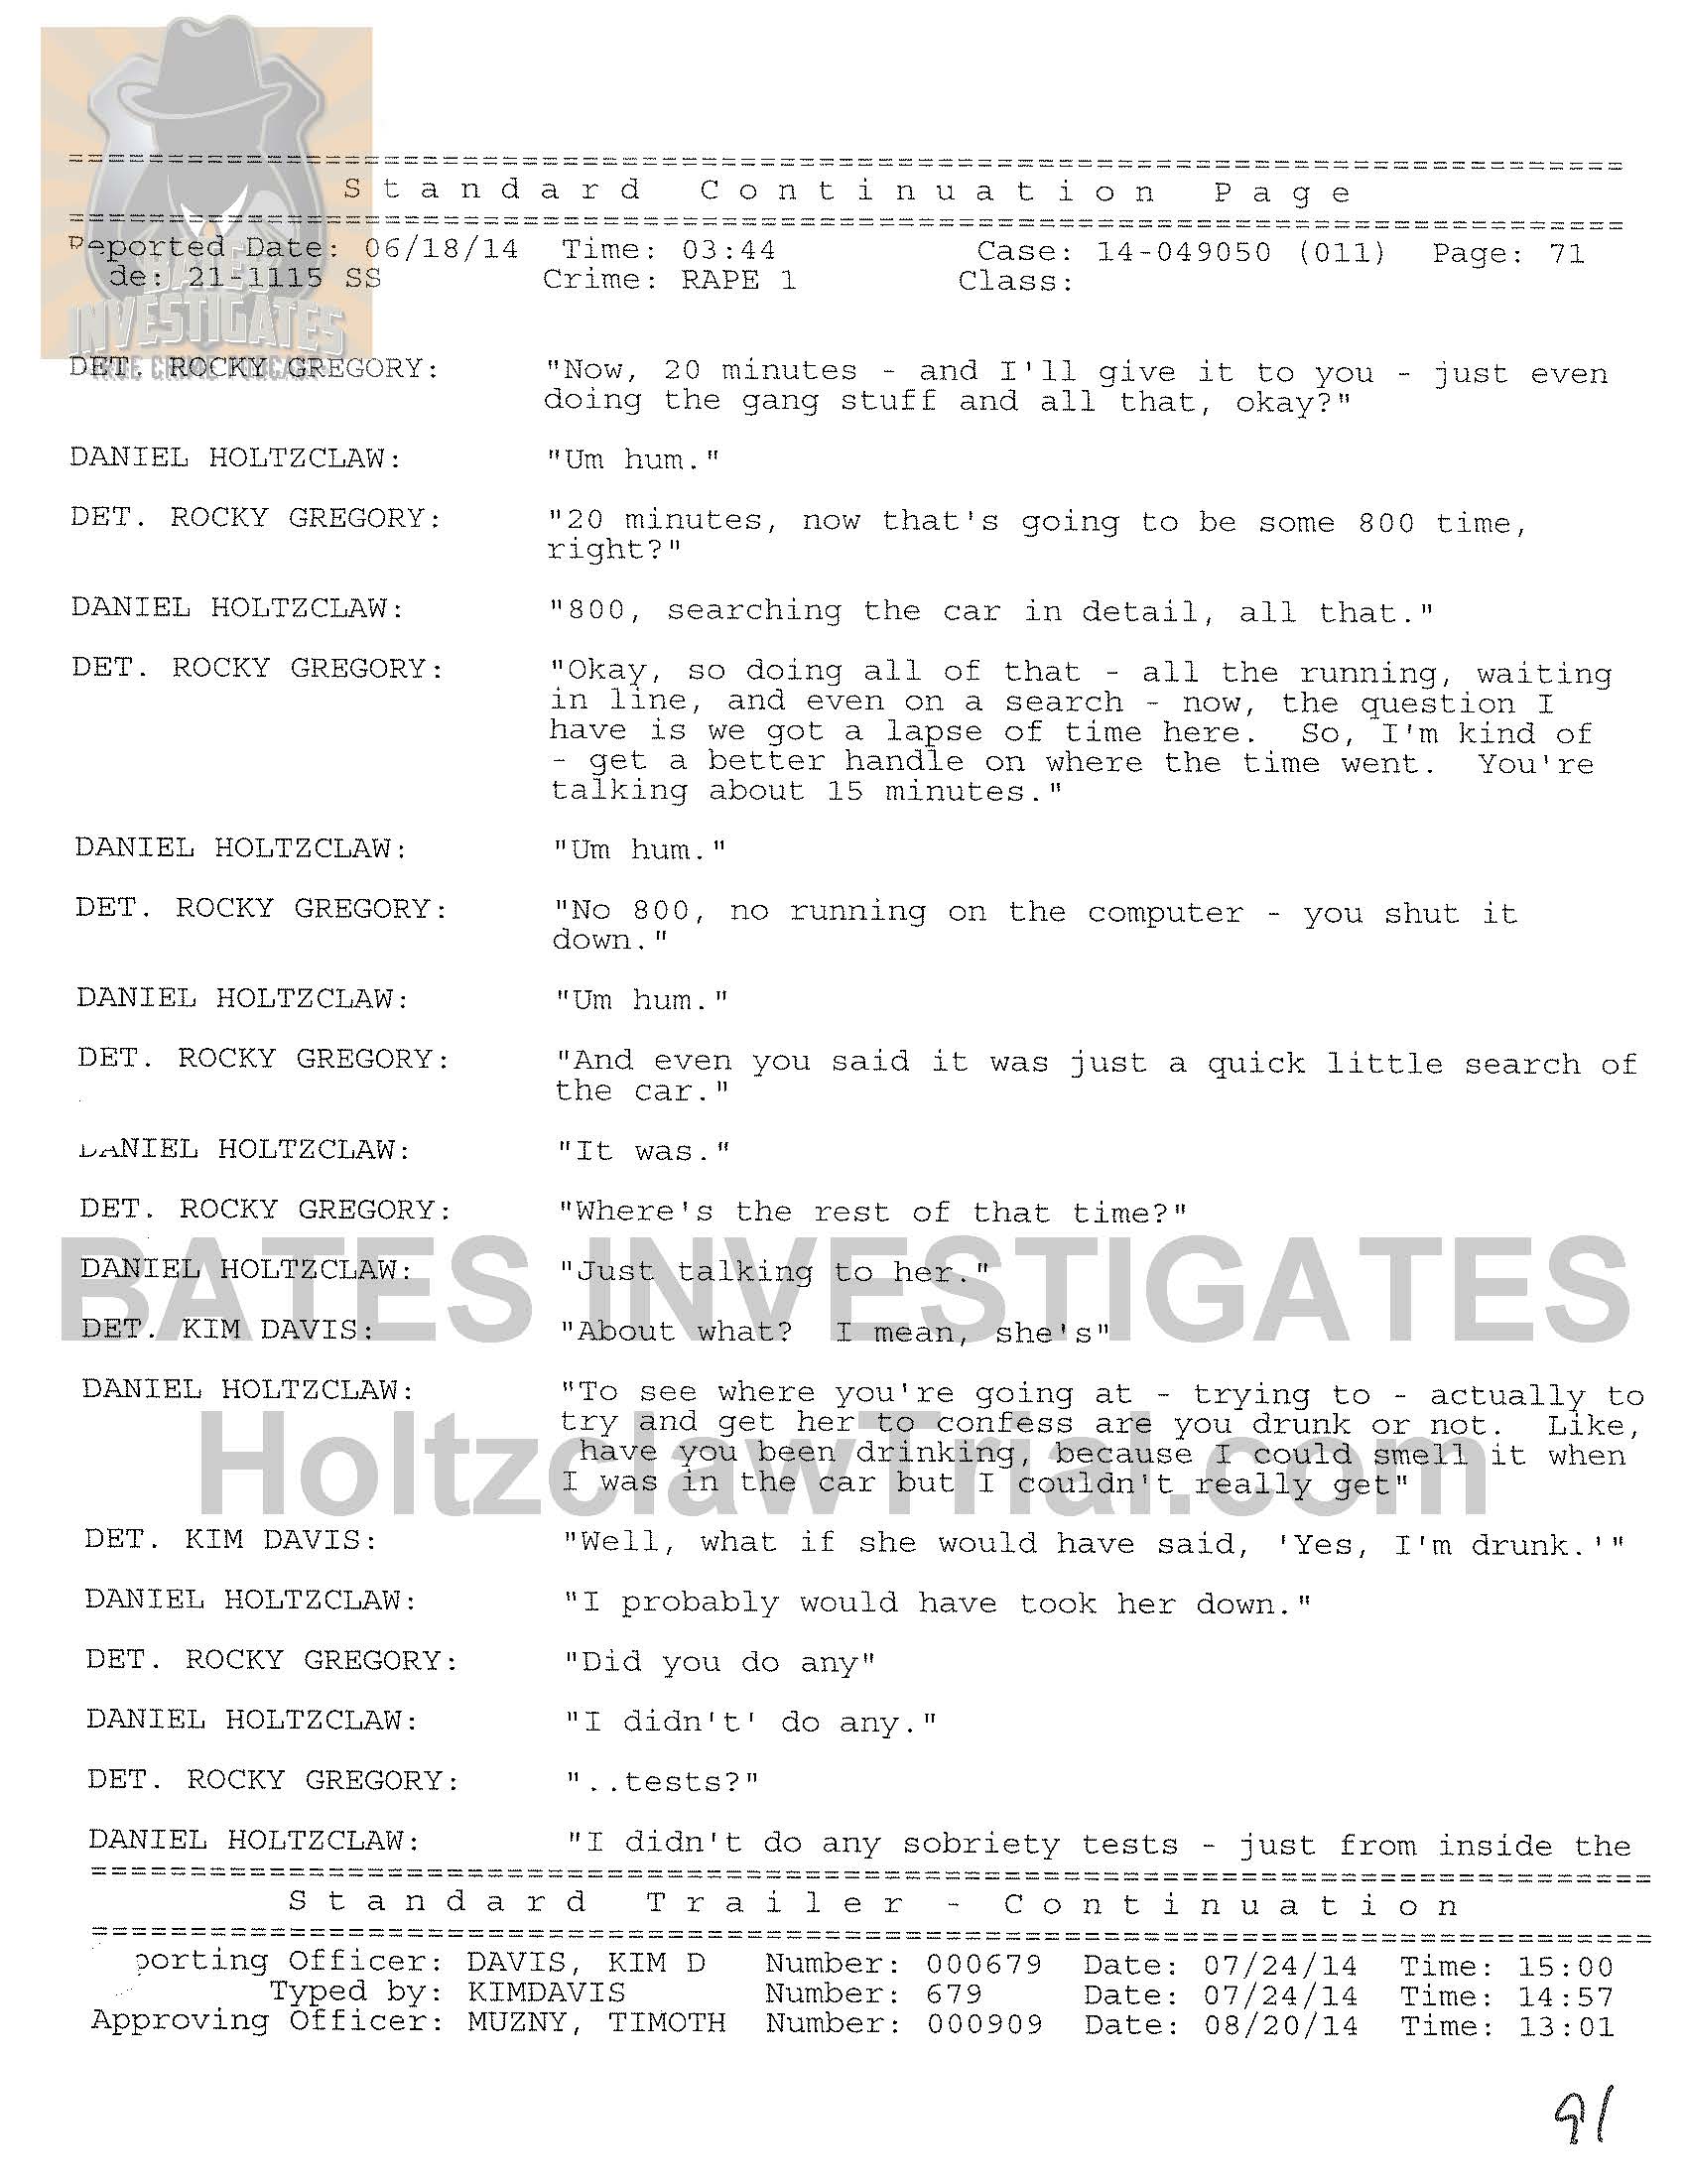 Holtzclaw Interrogation Transcript - Ep02 Redacted_Page_71.jpg